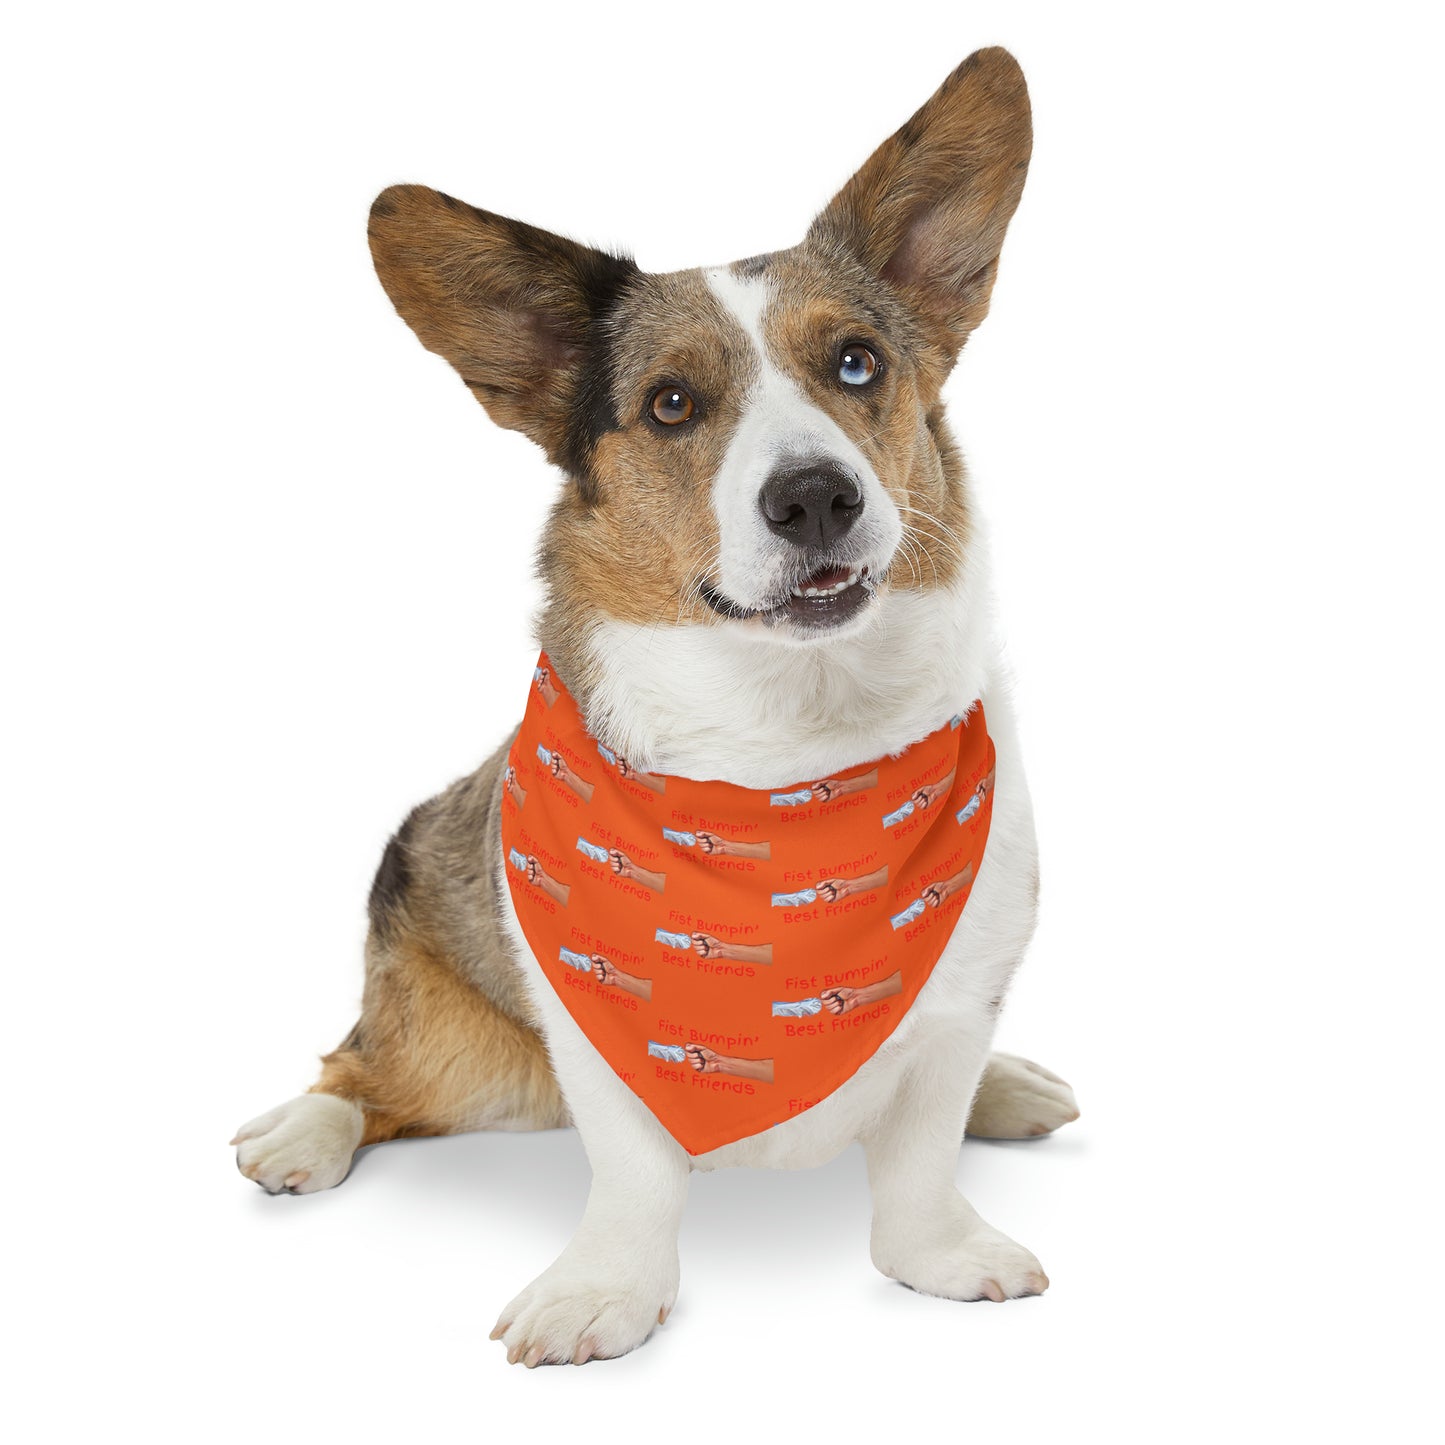 Fist Bumpin’ Best Friends Opie’s Cavalier King Charles Spaniel Paw Pet Bandana Collar Orange with KC Red lettering.